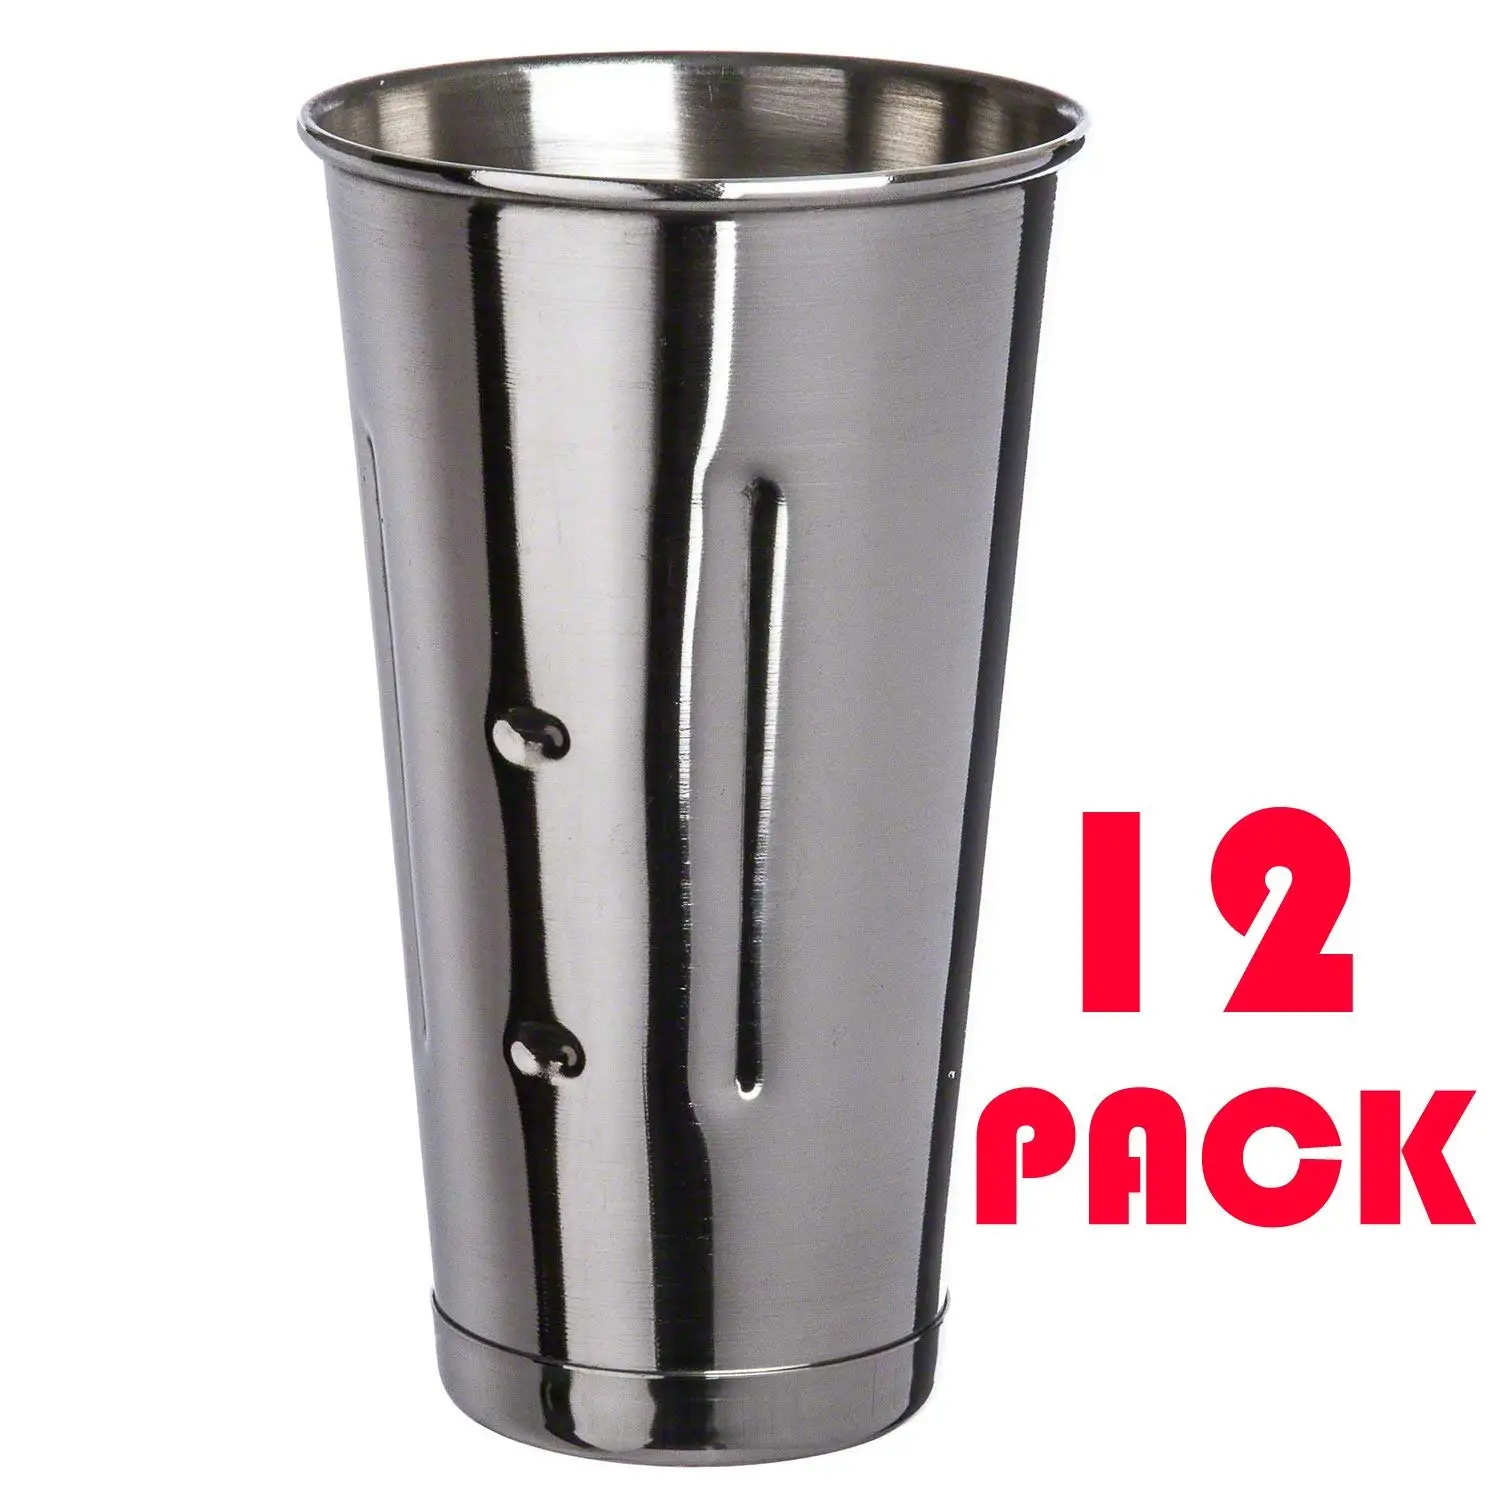 Commercial Grade Malt Cups Professional Blender Cup 30 oz Stainless Steel Malt Cup by Tezzorio Set of 2 Cocktail Mixing Cup Milkshake Cup